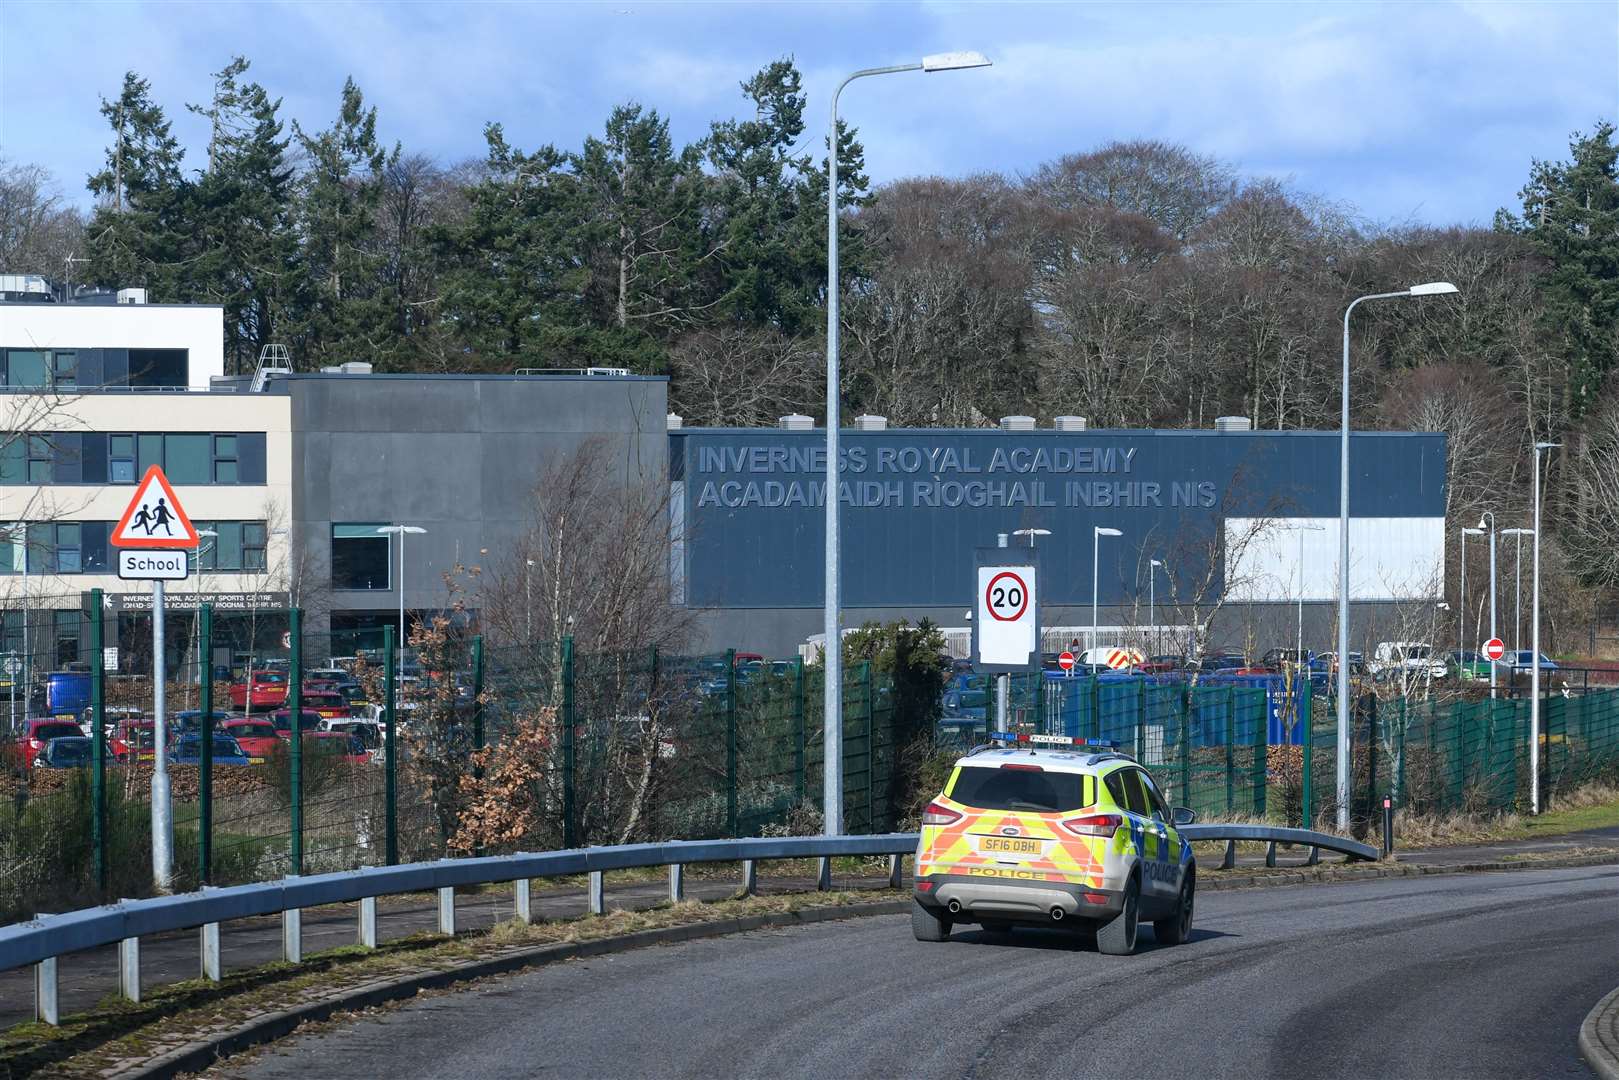 A police car has been seen patrolling near the Inverness Royal Academy.